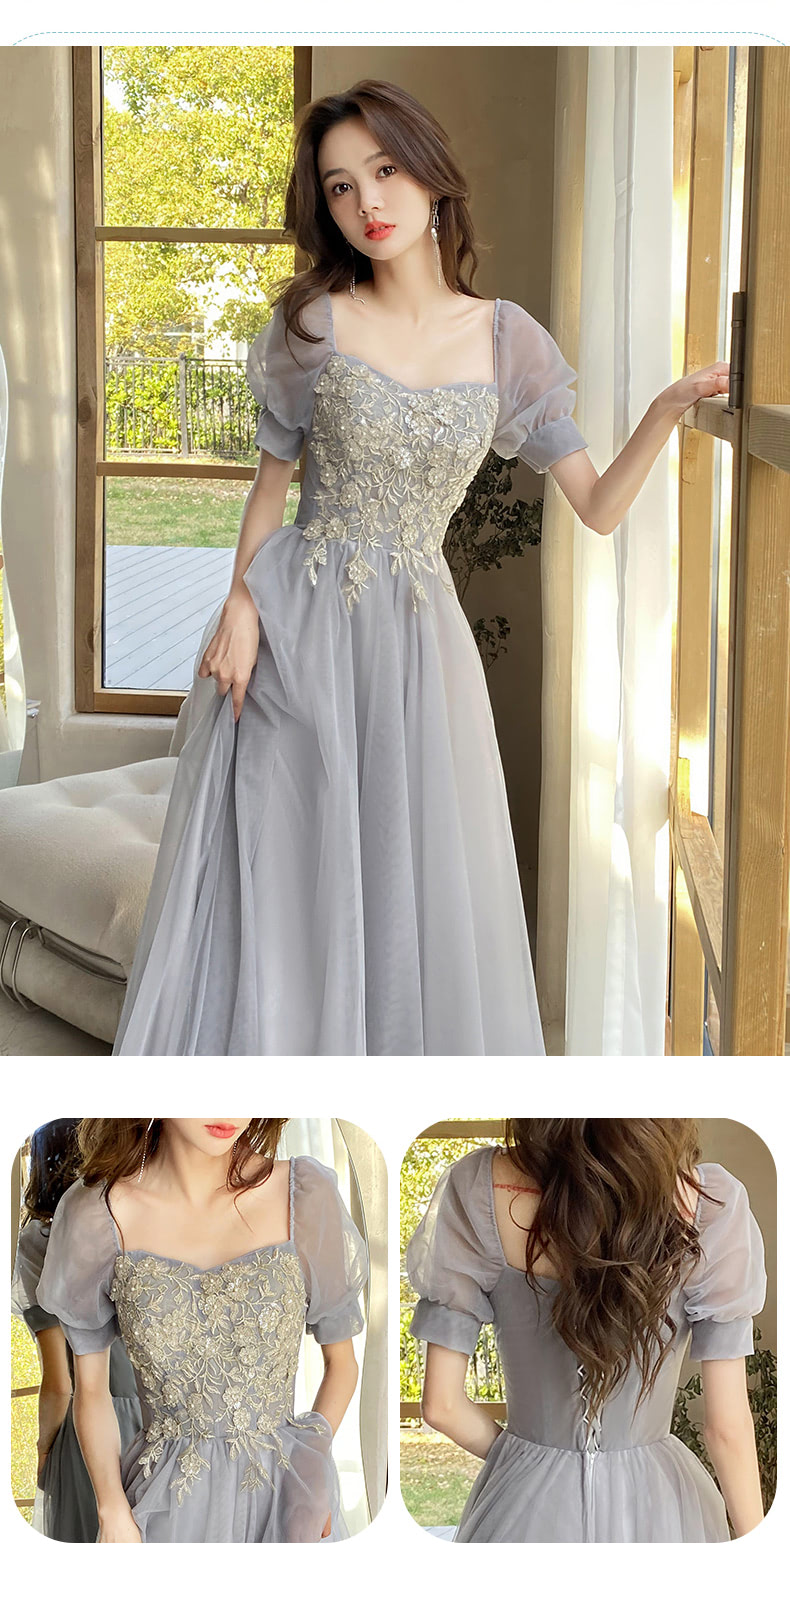 Floral-Embroidery-Gray-Bridesmaid-Party-Formal-Maxi-Long-Dress15.jpg